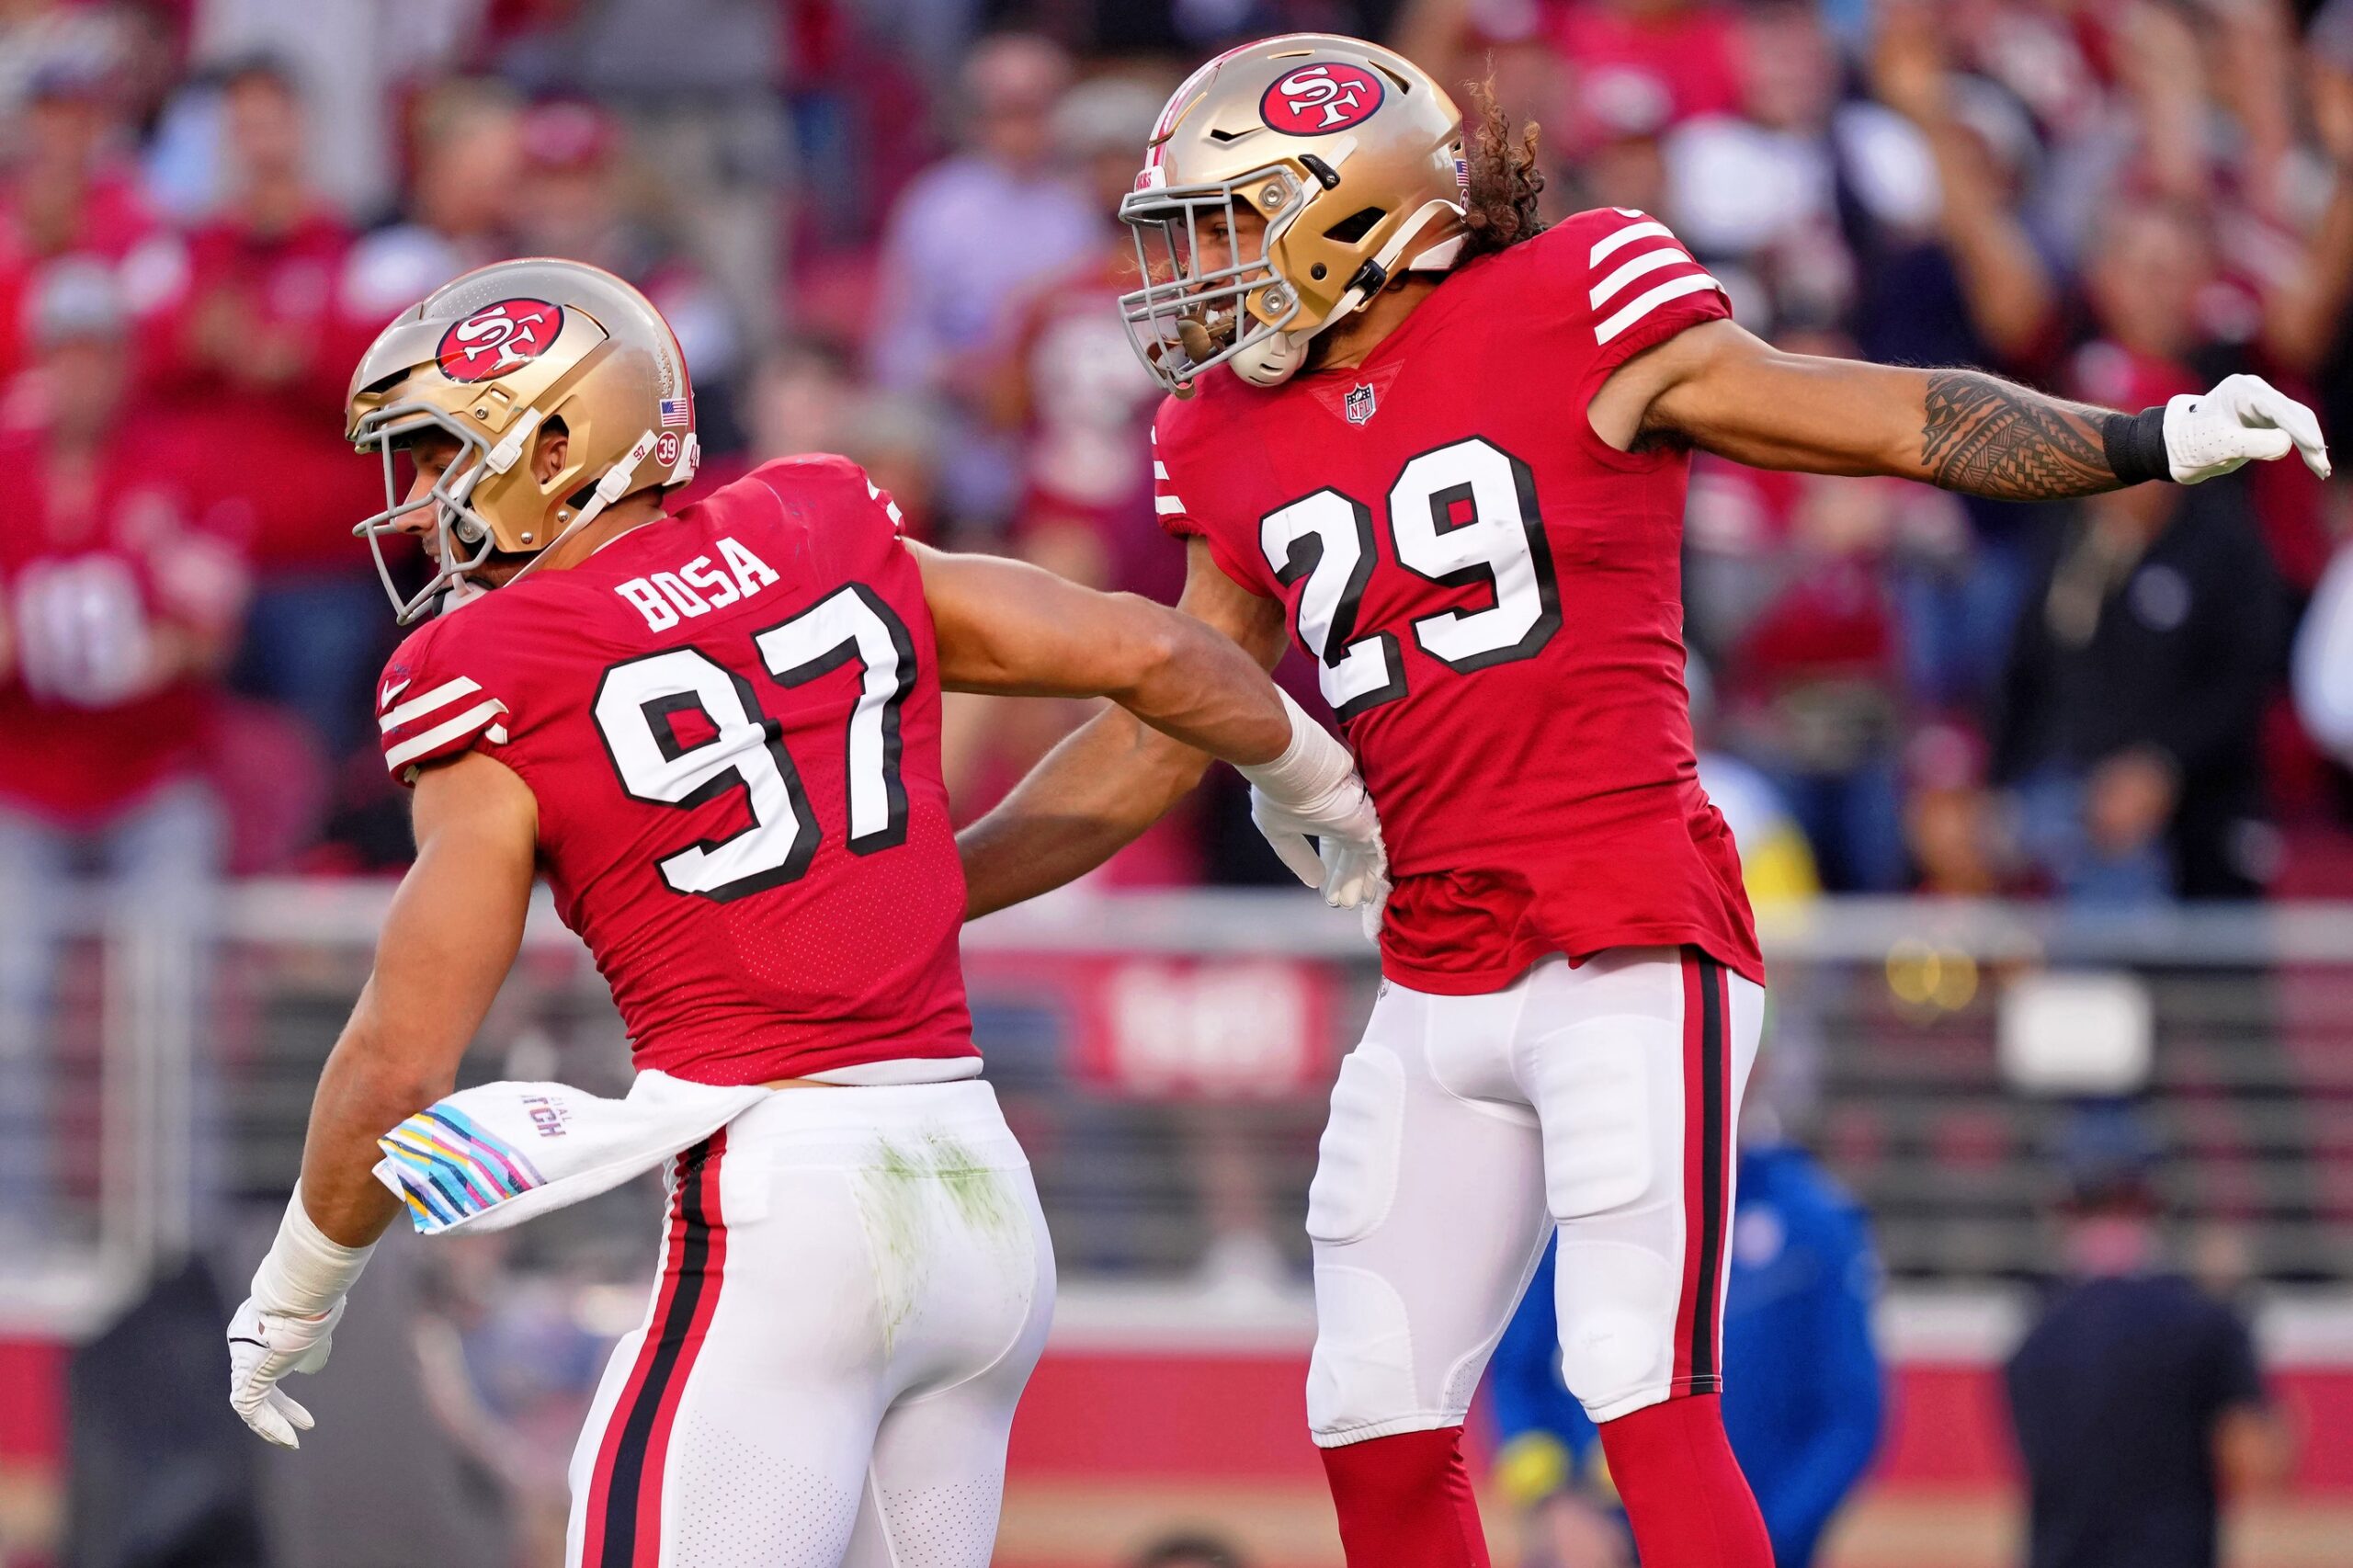 Oct 3, 2022; Santa Clara, California, USA; San Francisco 49ers defensive end Nick Bosa (97) celebrates with safety Talanoa Hufanga (29) after making a sack against the Los Angeles Rams during the first quarter at Levi's Stadium. Mandatory Credit: Kyle Terada-USA TODAY Sports